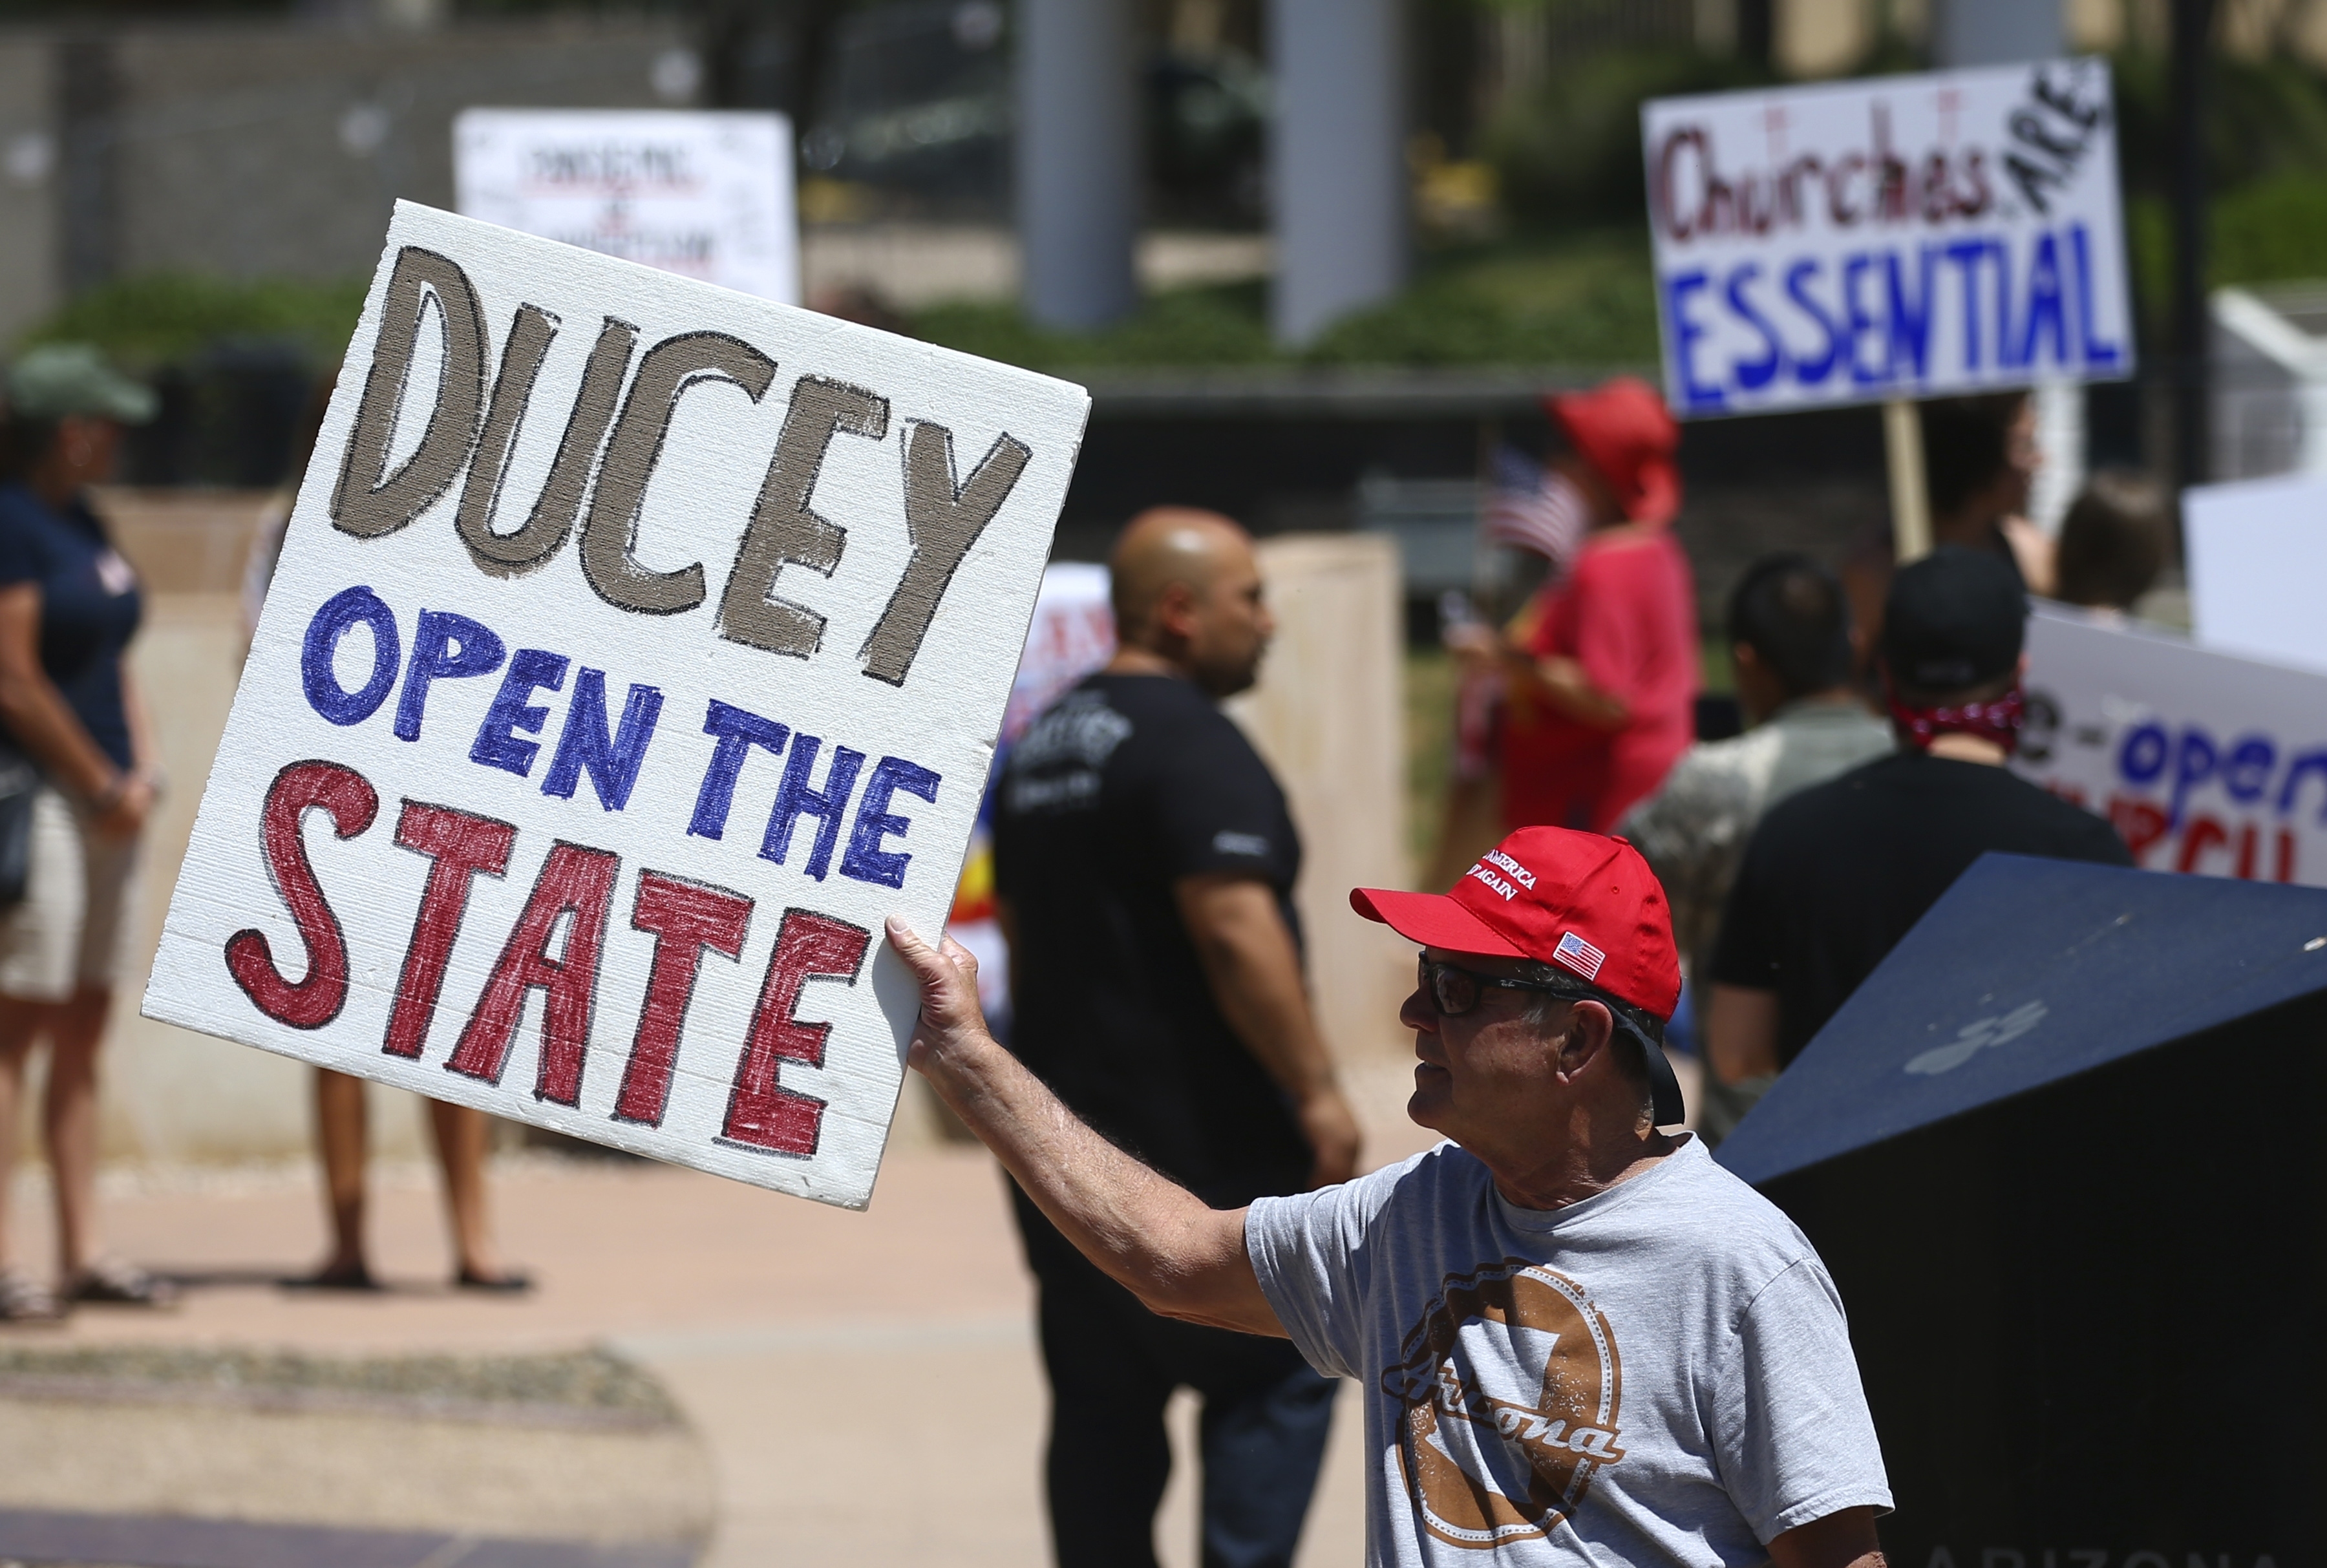 Protesters rally at the state Capitol to 're-open' Arizona against the governor's stay-at-home order due to the coronavirus Monday, April 20, 2020, in Phoenix. (AP Photo/Ross D. Franklin)